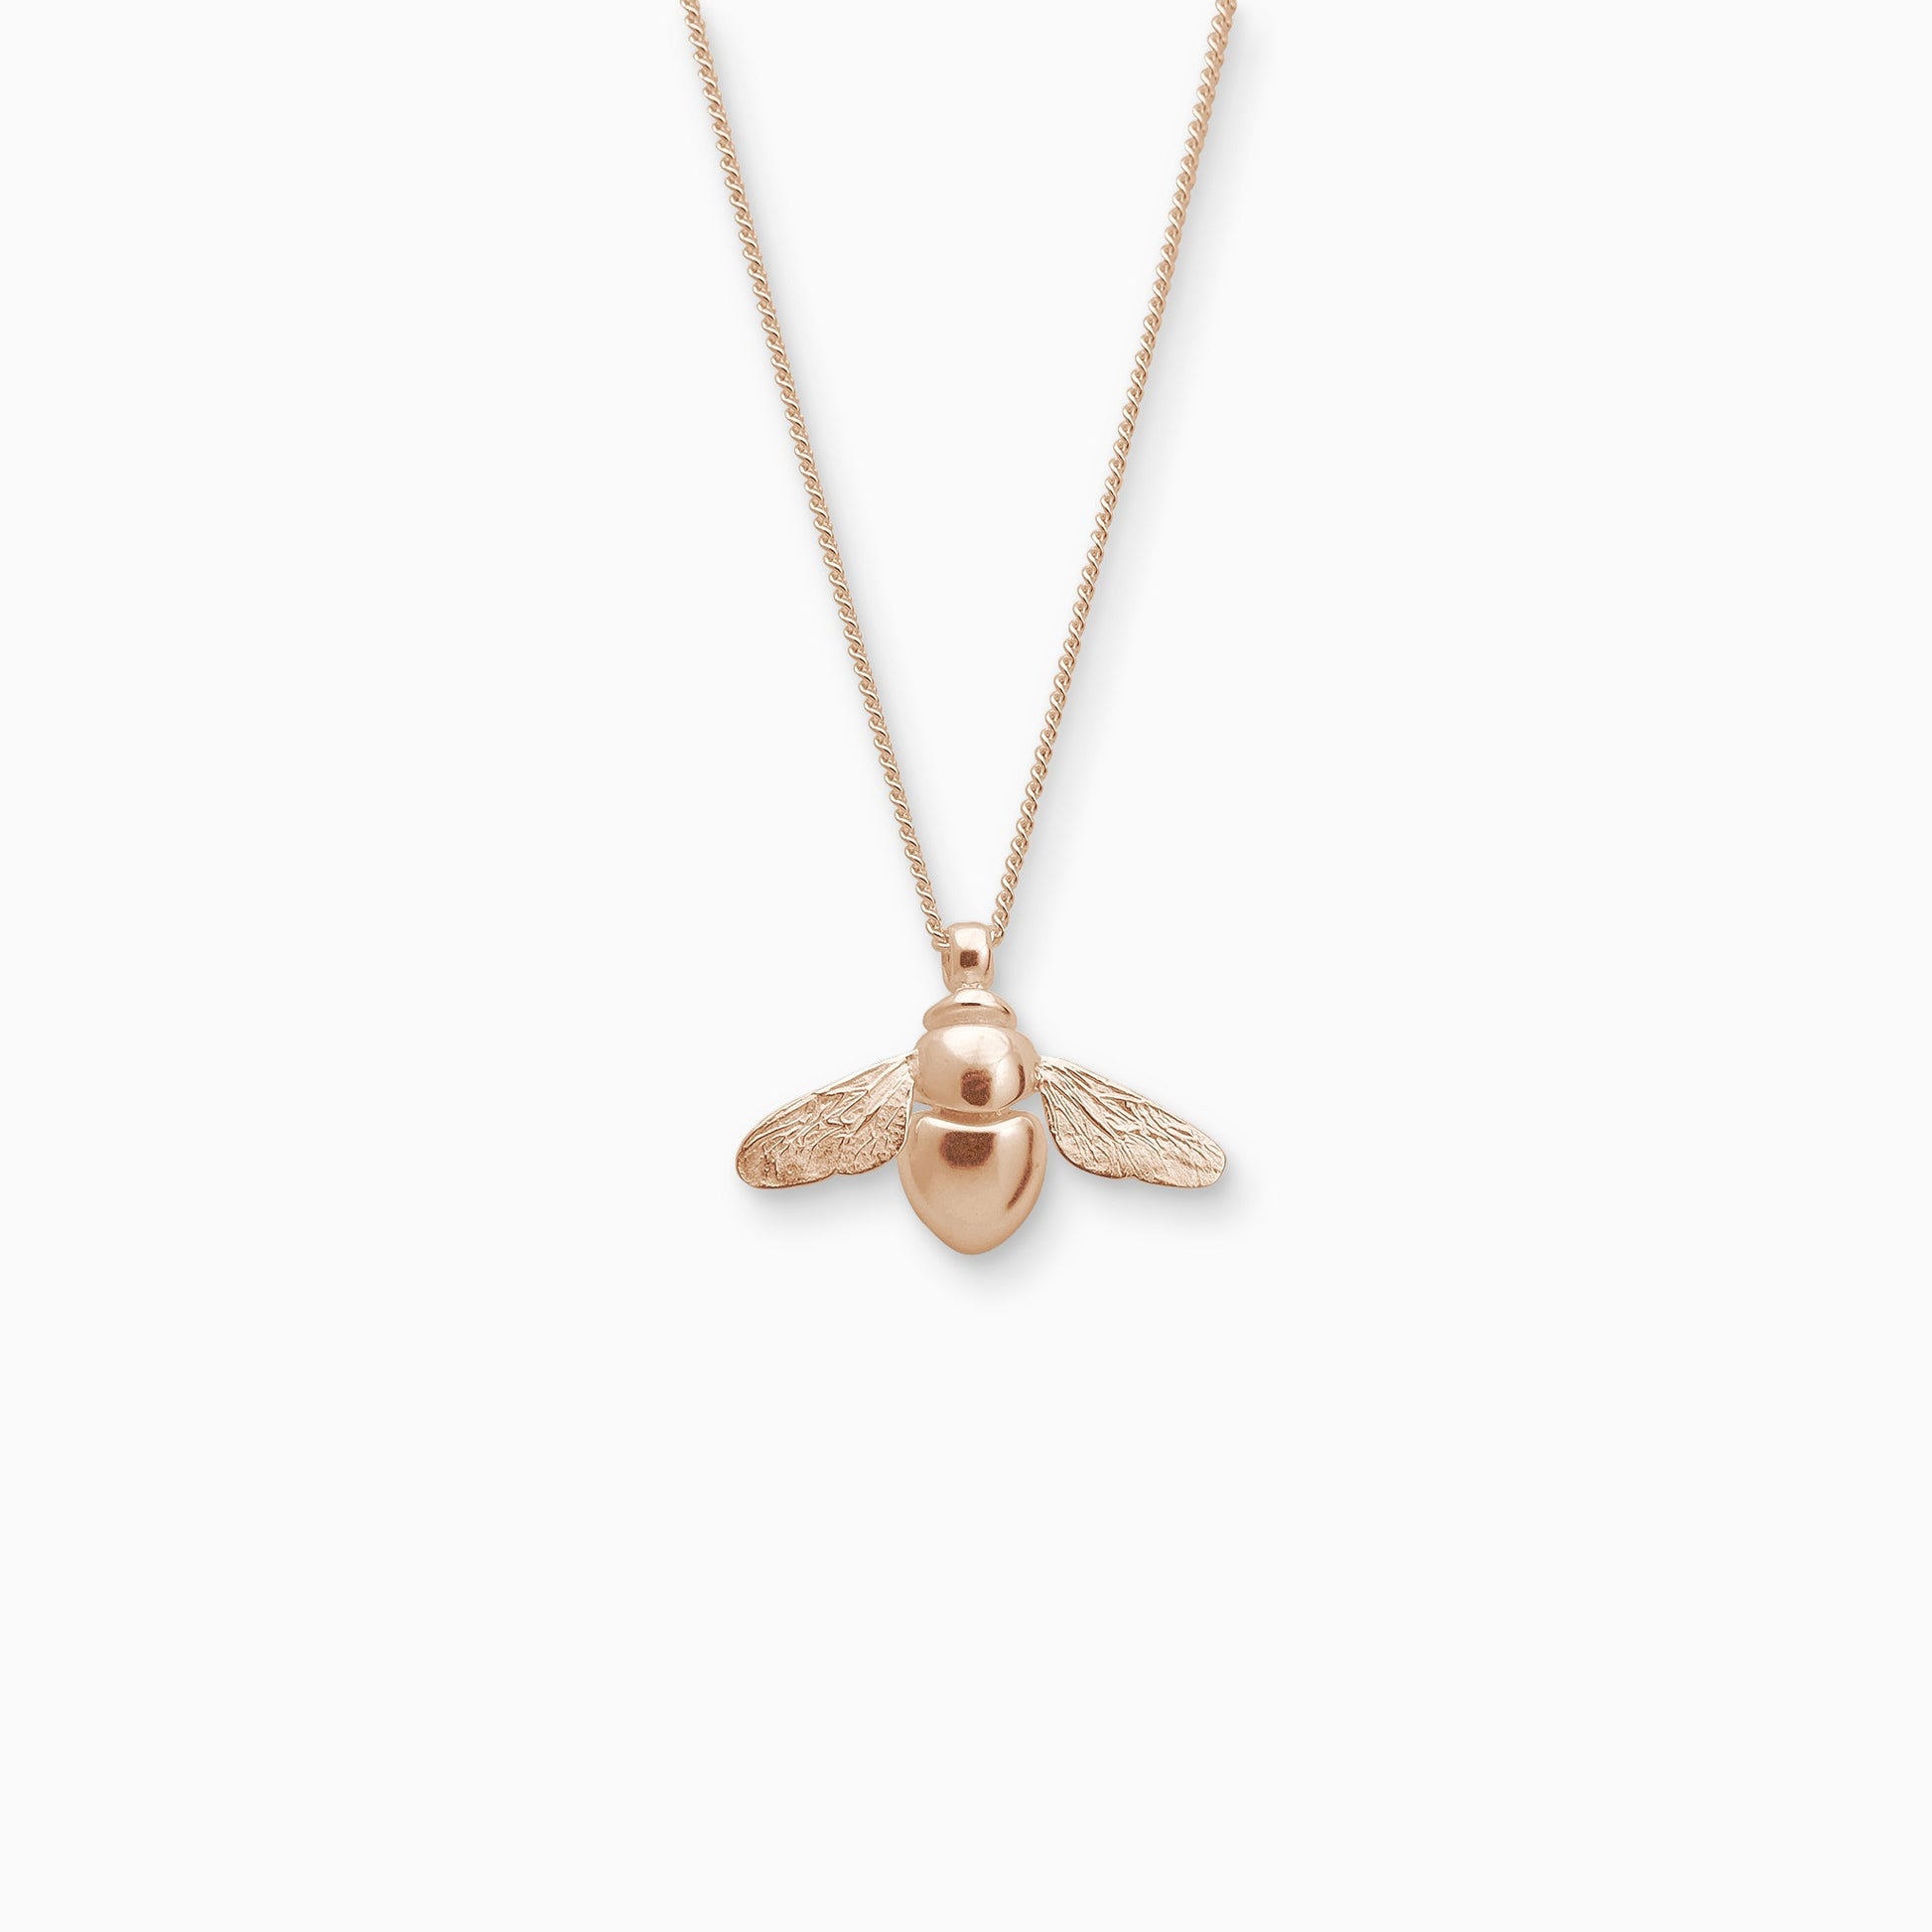 18ct Fairtrade rose gold pendant in the exact form of a Bumble Bee. 22mm x 28mm on a 45cm fine curb chain. The body of the Bee is smooth and shiny and the wings are textured with veins.